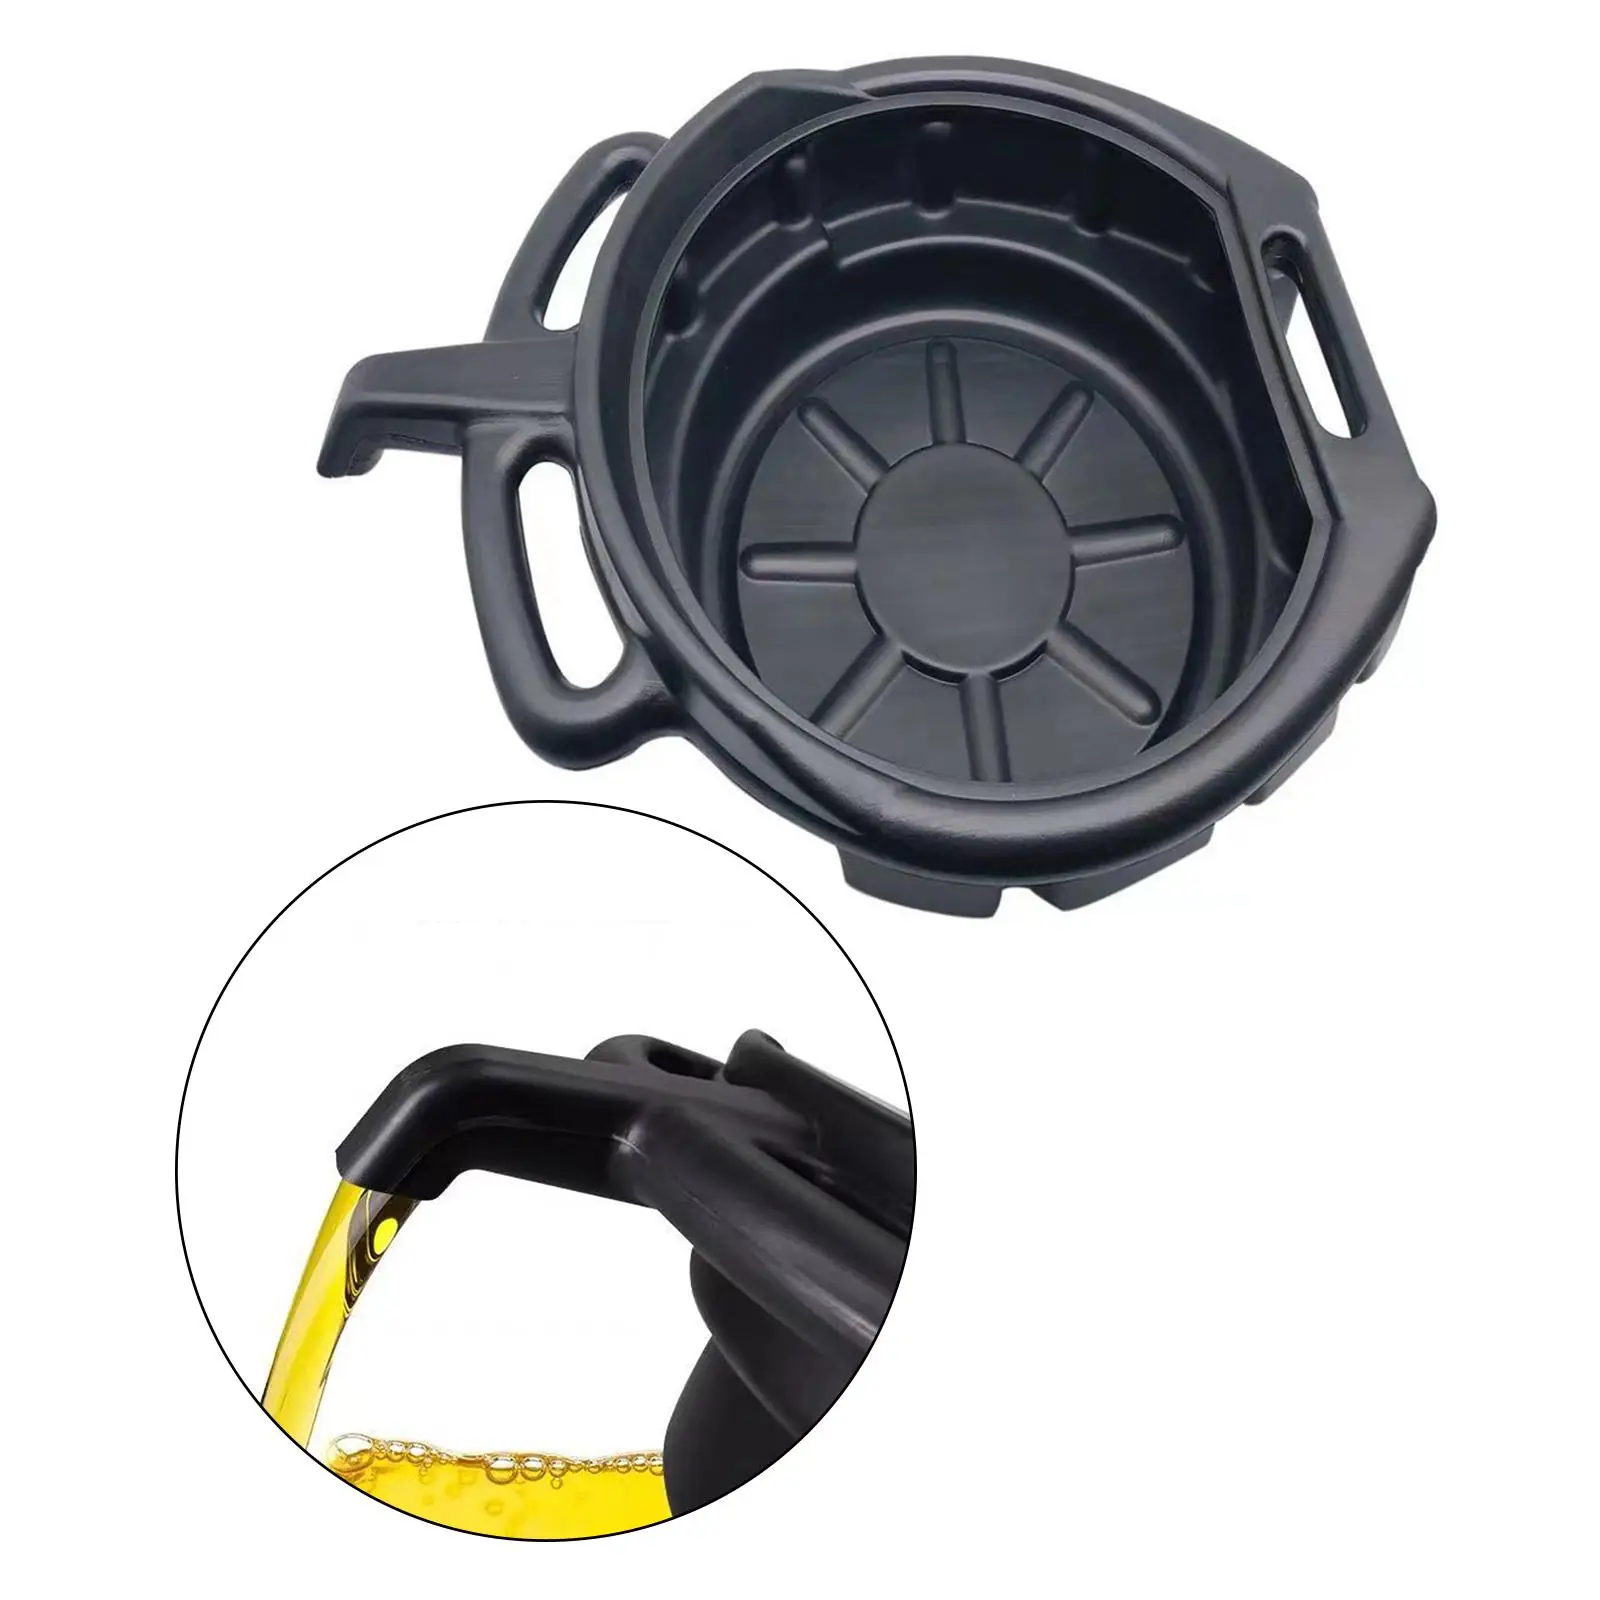 Oil Drain Container Can Leak Multifunction 10L Large Capacity Oil Trip Tray for Boat Workshop Vehicle Car Fuel Fluid